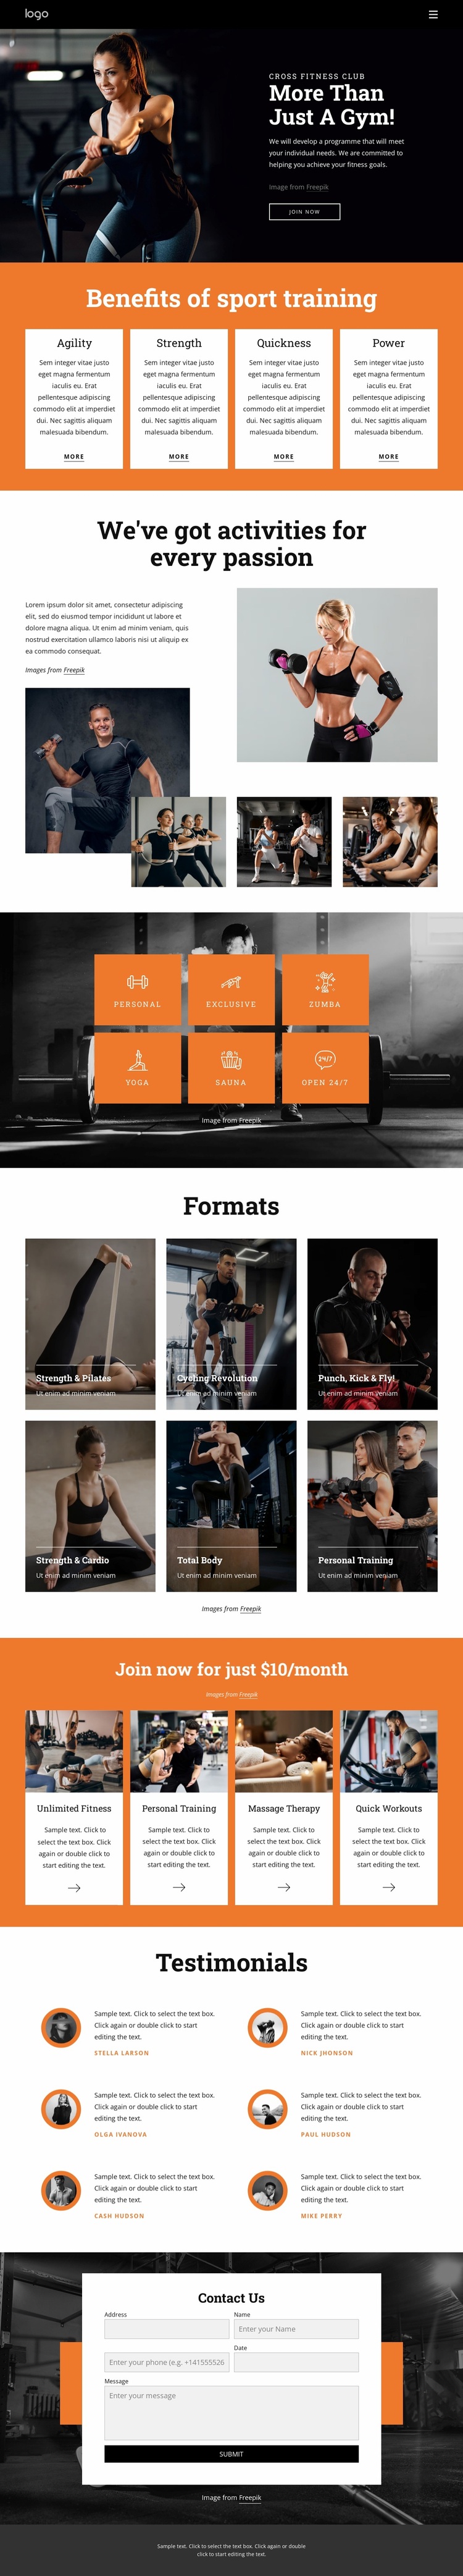 Join our community of fitness enthusiasts Website Design